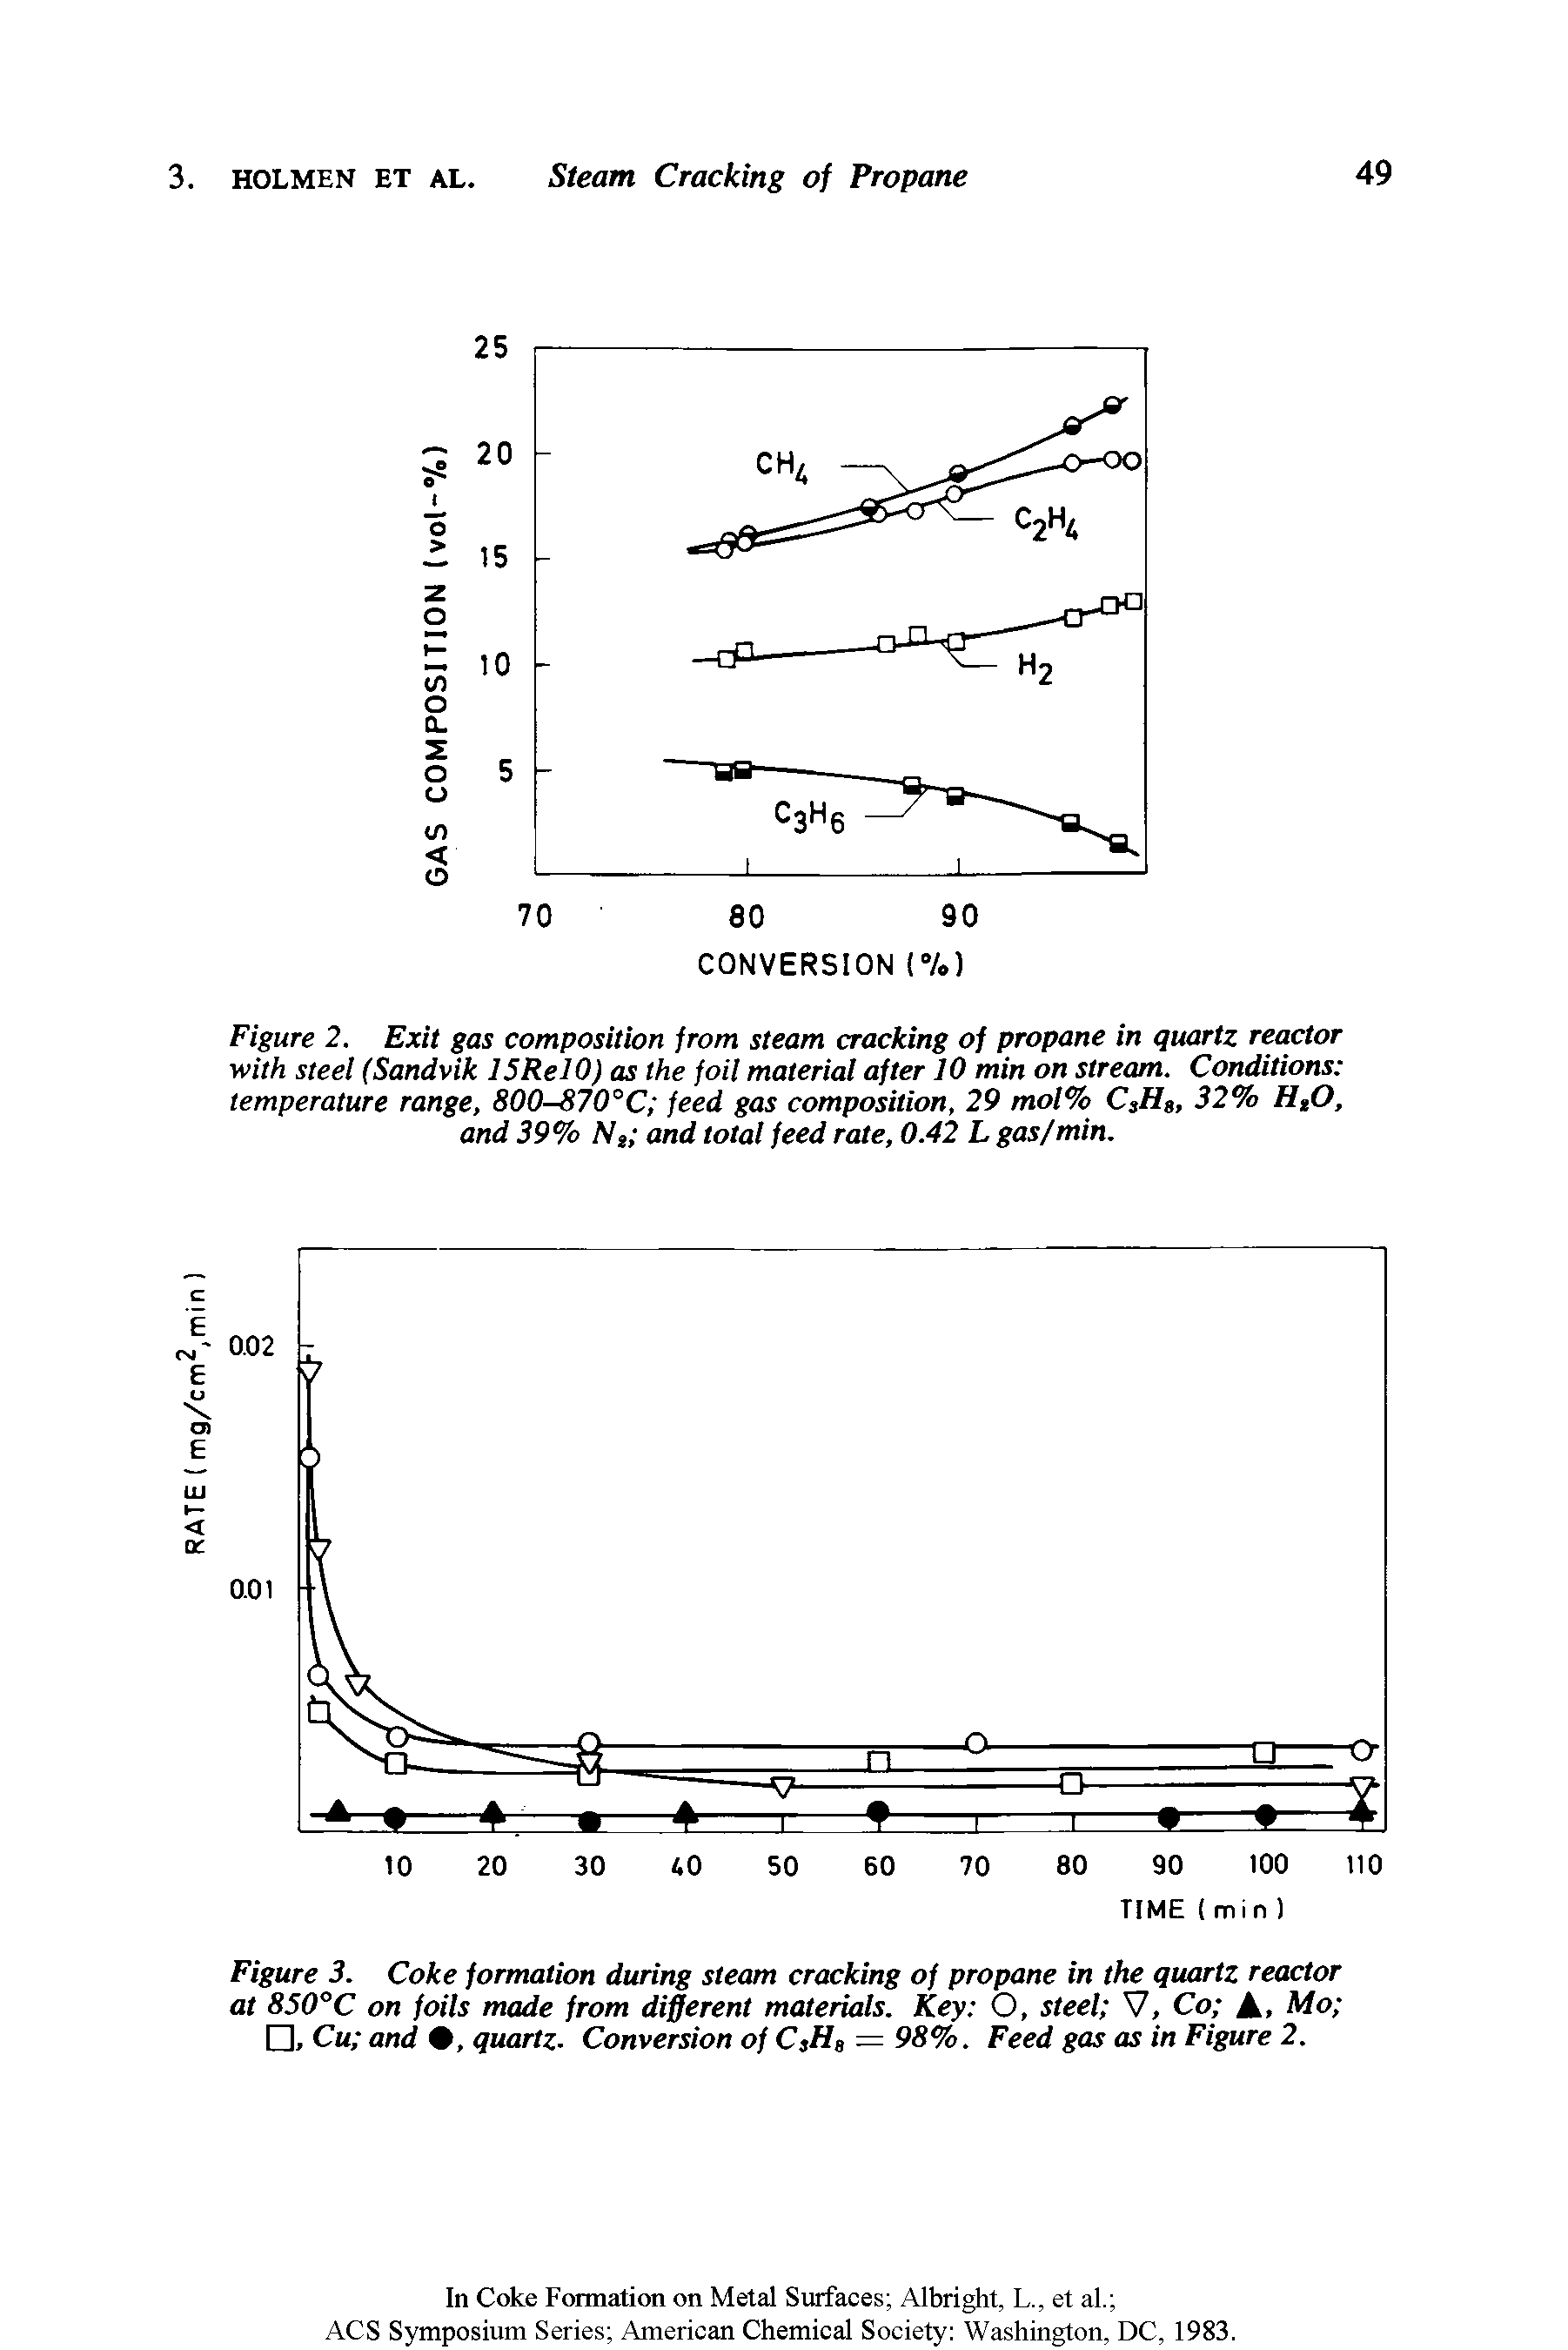 Figure 2. Exit gas composition from steam cracking of propane in quartz reactor with steel (Sandvik 15RelO) as the foil material after 10 min on stream. Conditions temperature range, 800-870°C feed gas composition, 29 mol% C3Ha, 32% HtO, and 39% N3 and total feed rate, 0.42 L gas/min.